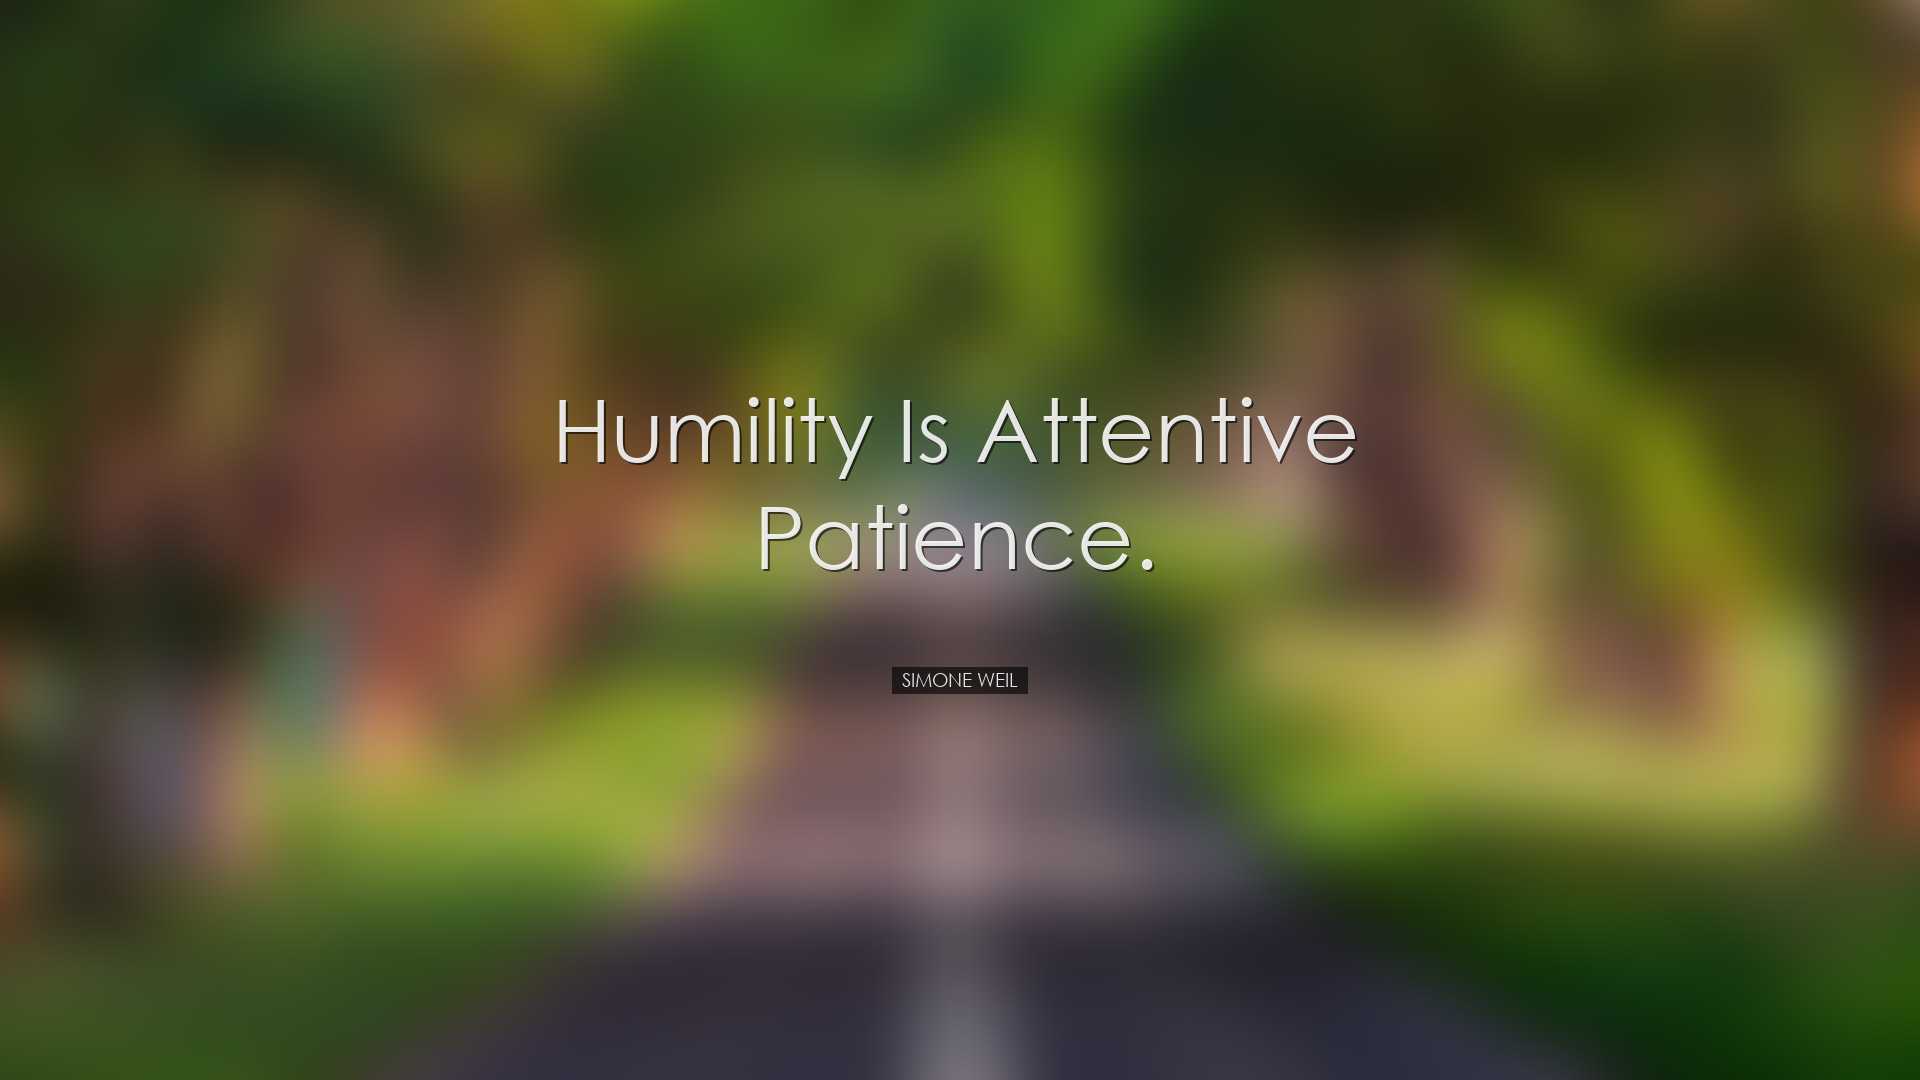 Humility is attentive patience. - Simone Weil